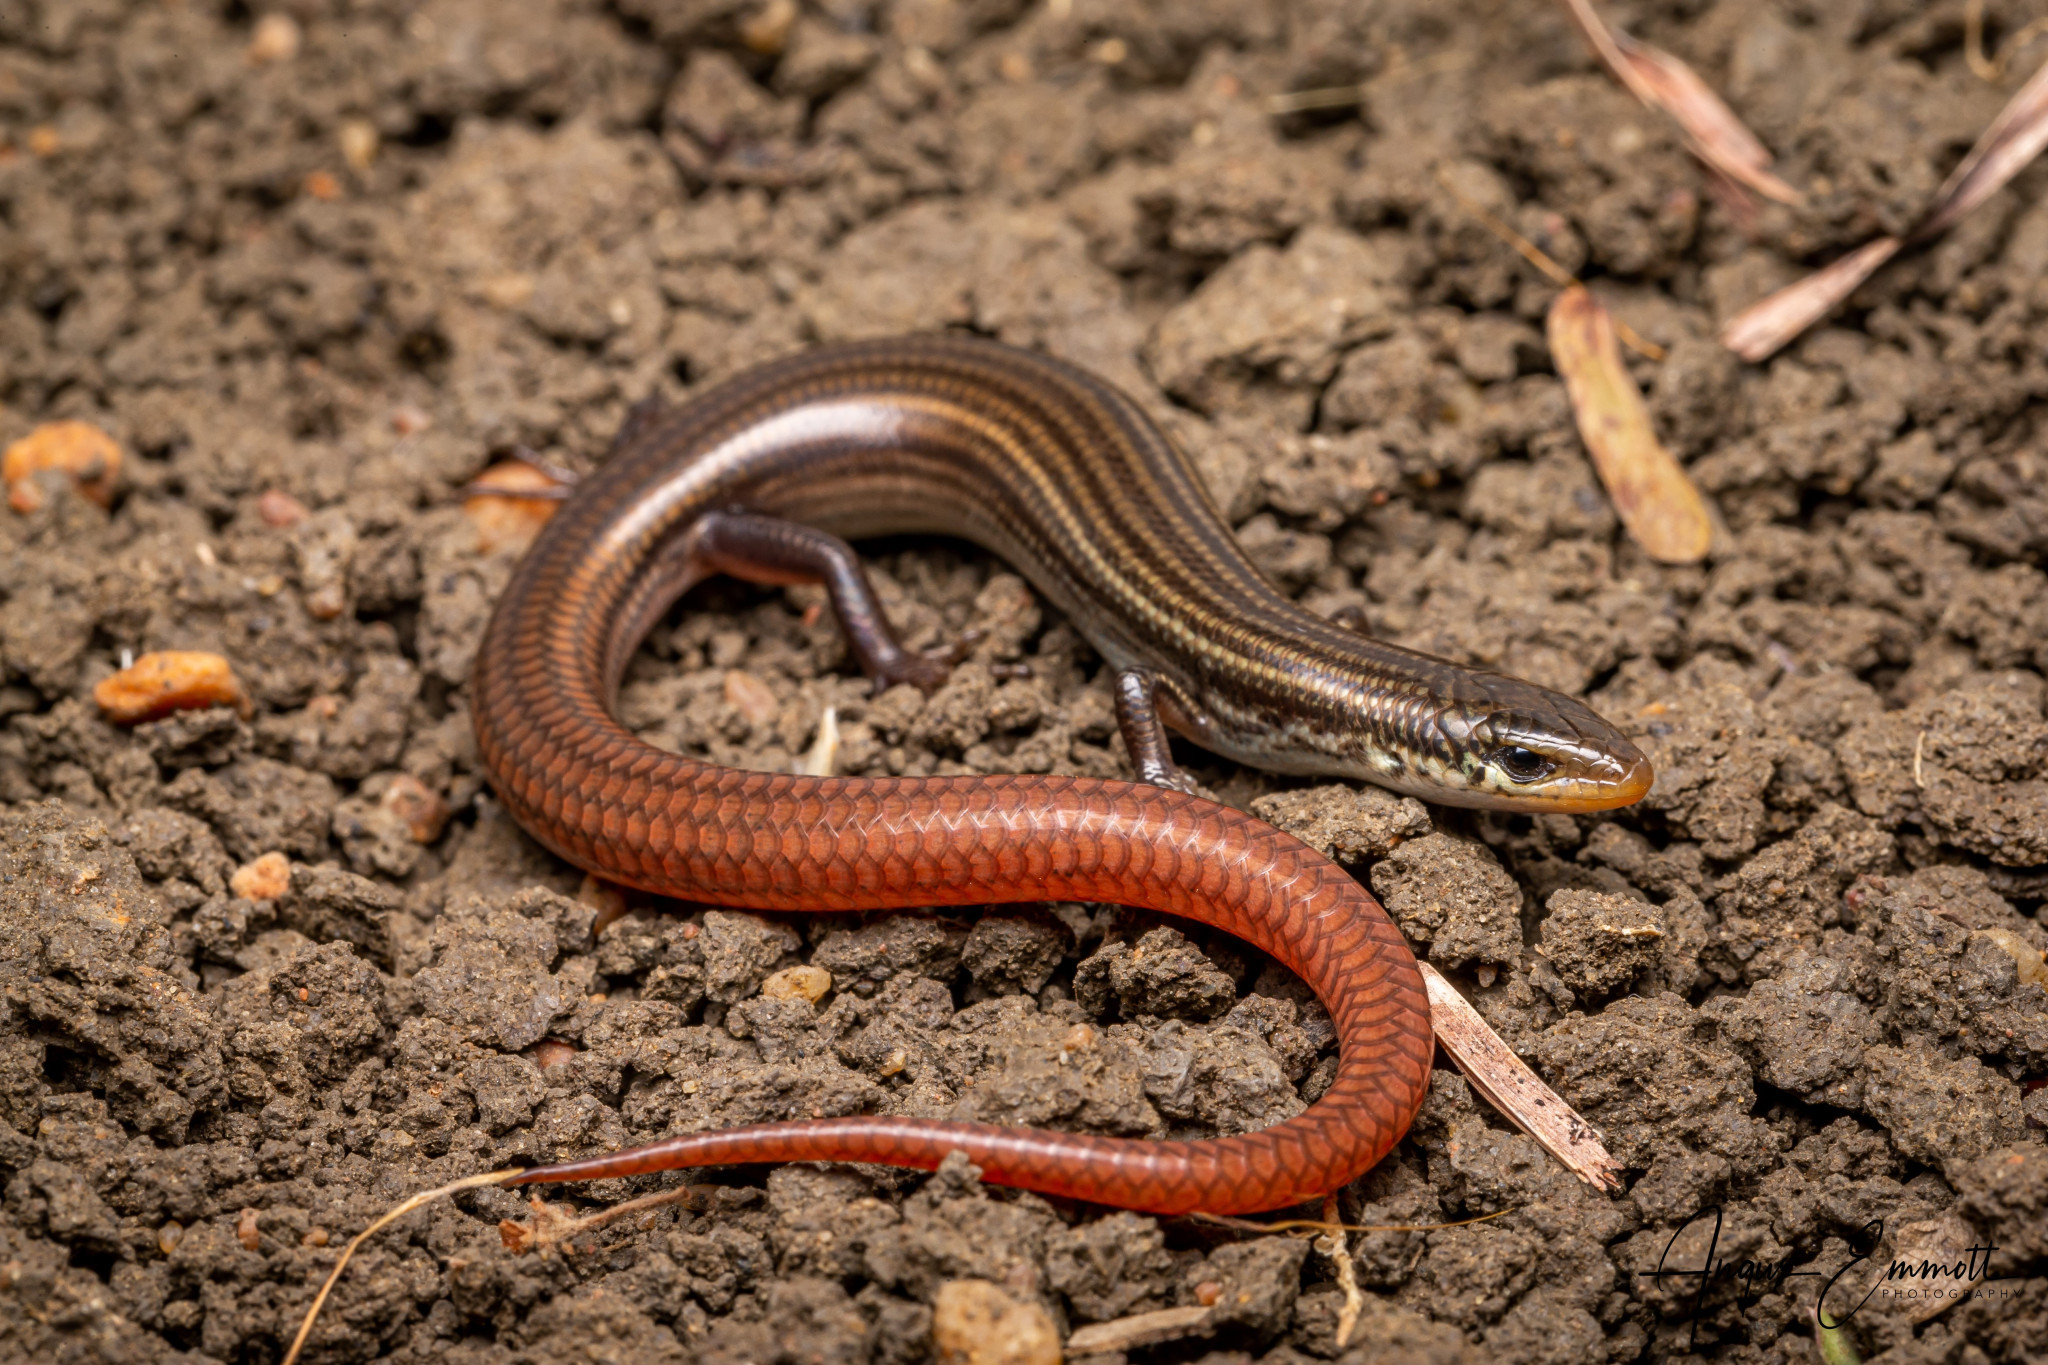 The Lyon’s Grassland Striped Skink has been sighted near Mt Surprise after 42 years. Image: Angus Emmott.